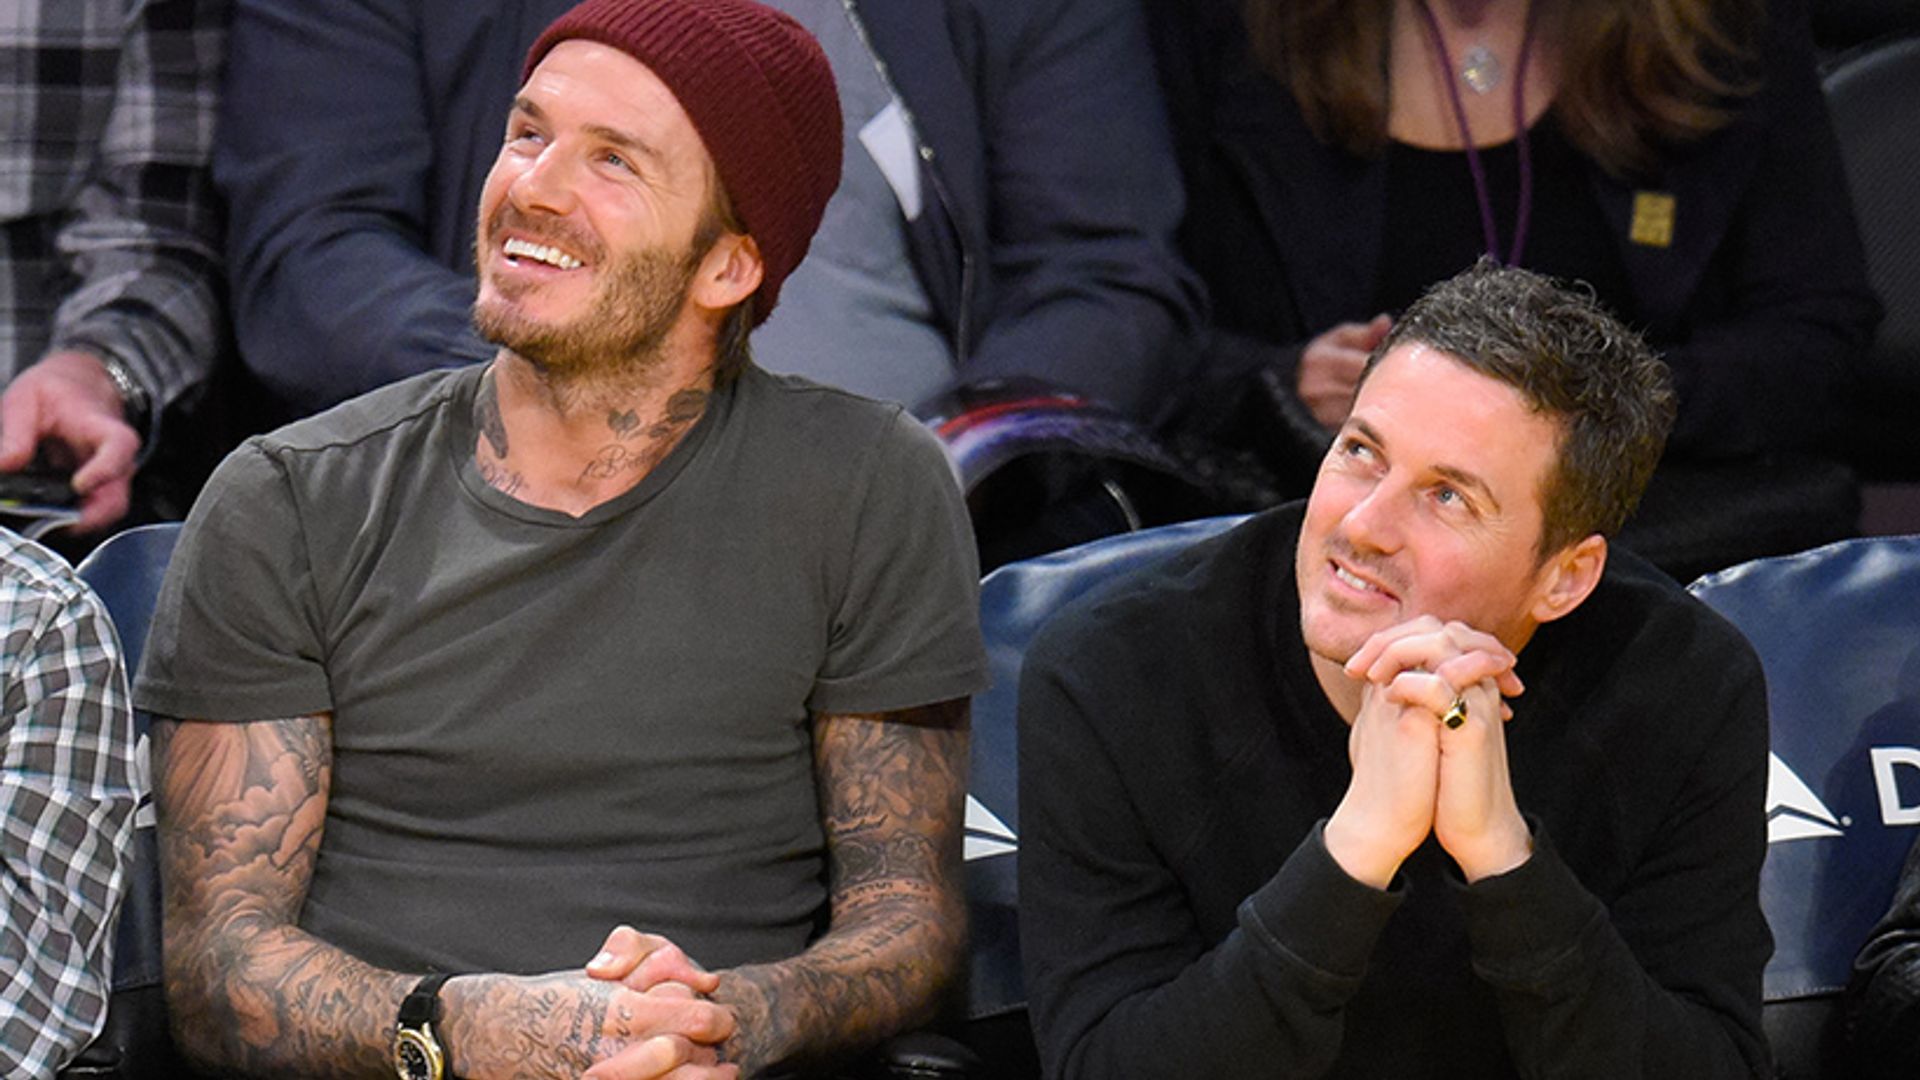 David Beckham enjoys a boys' night out with son Romeo at the Los